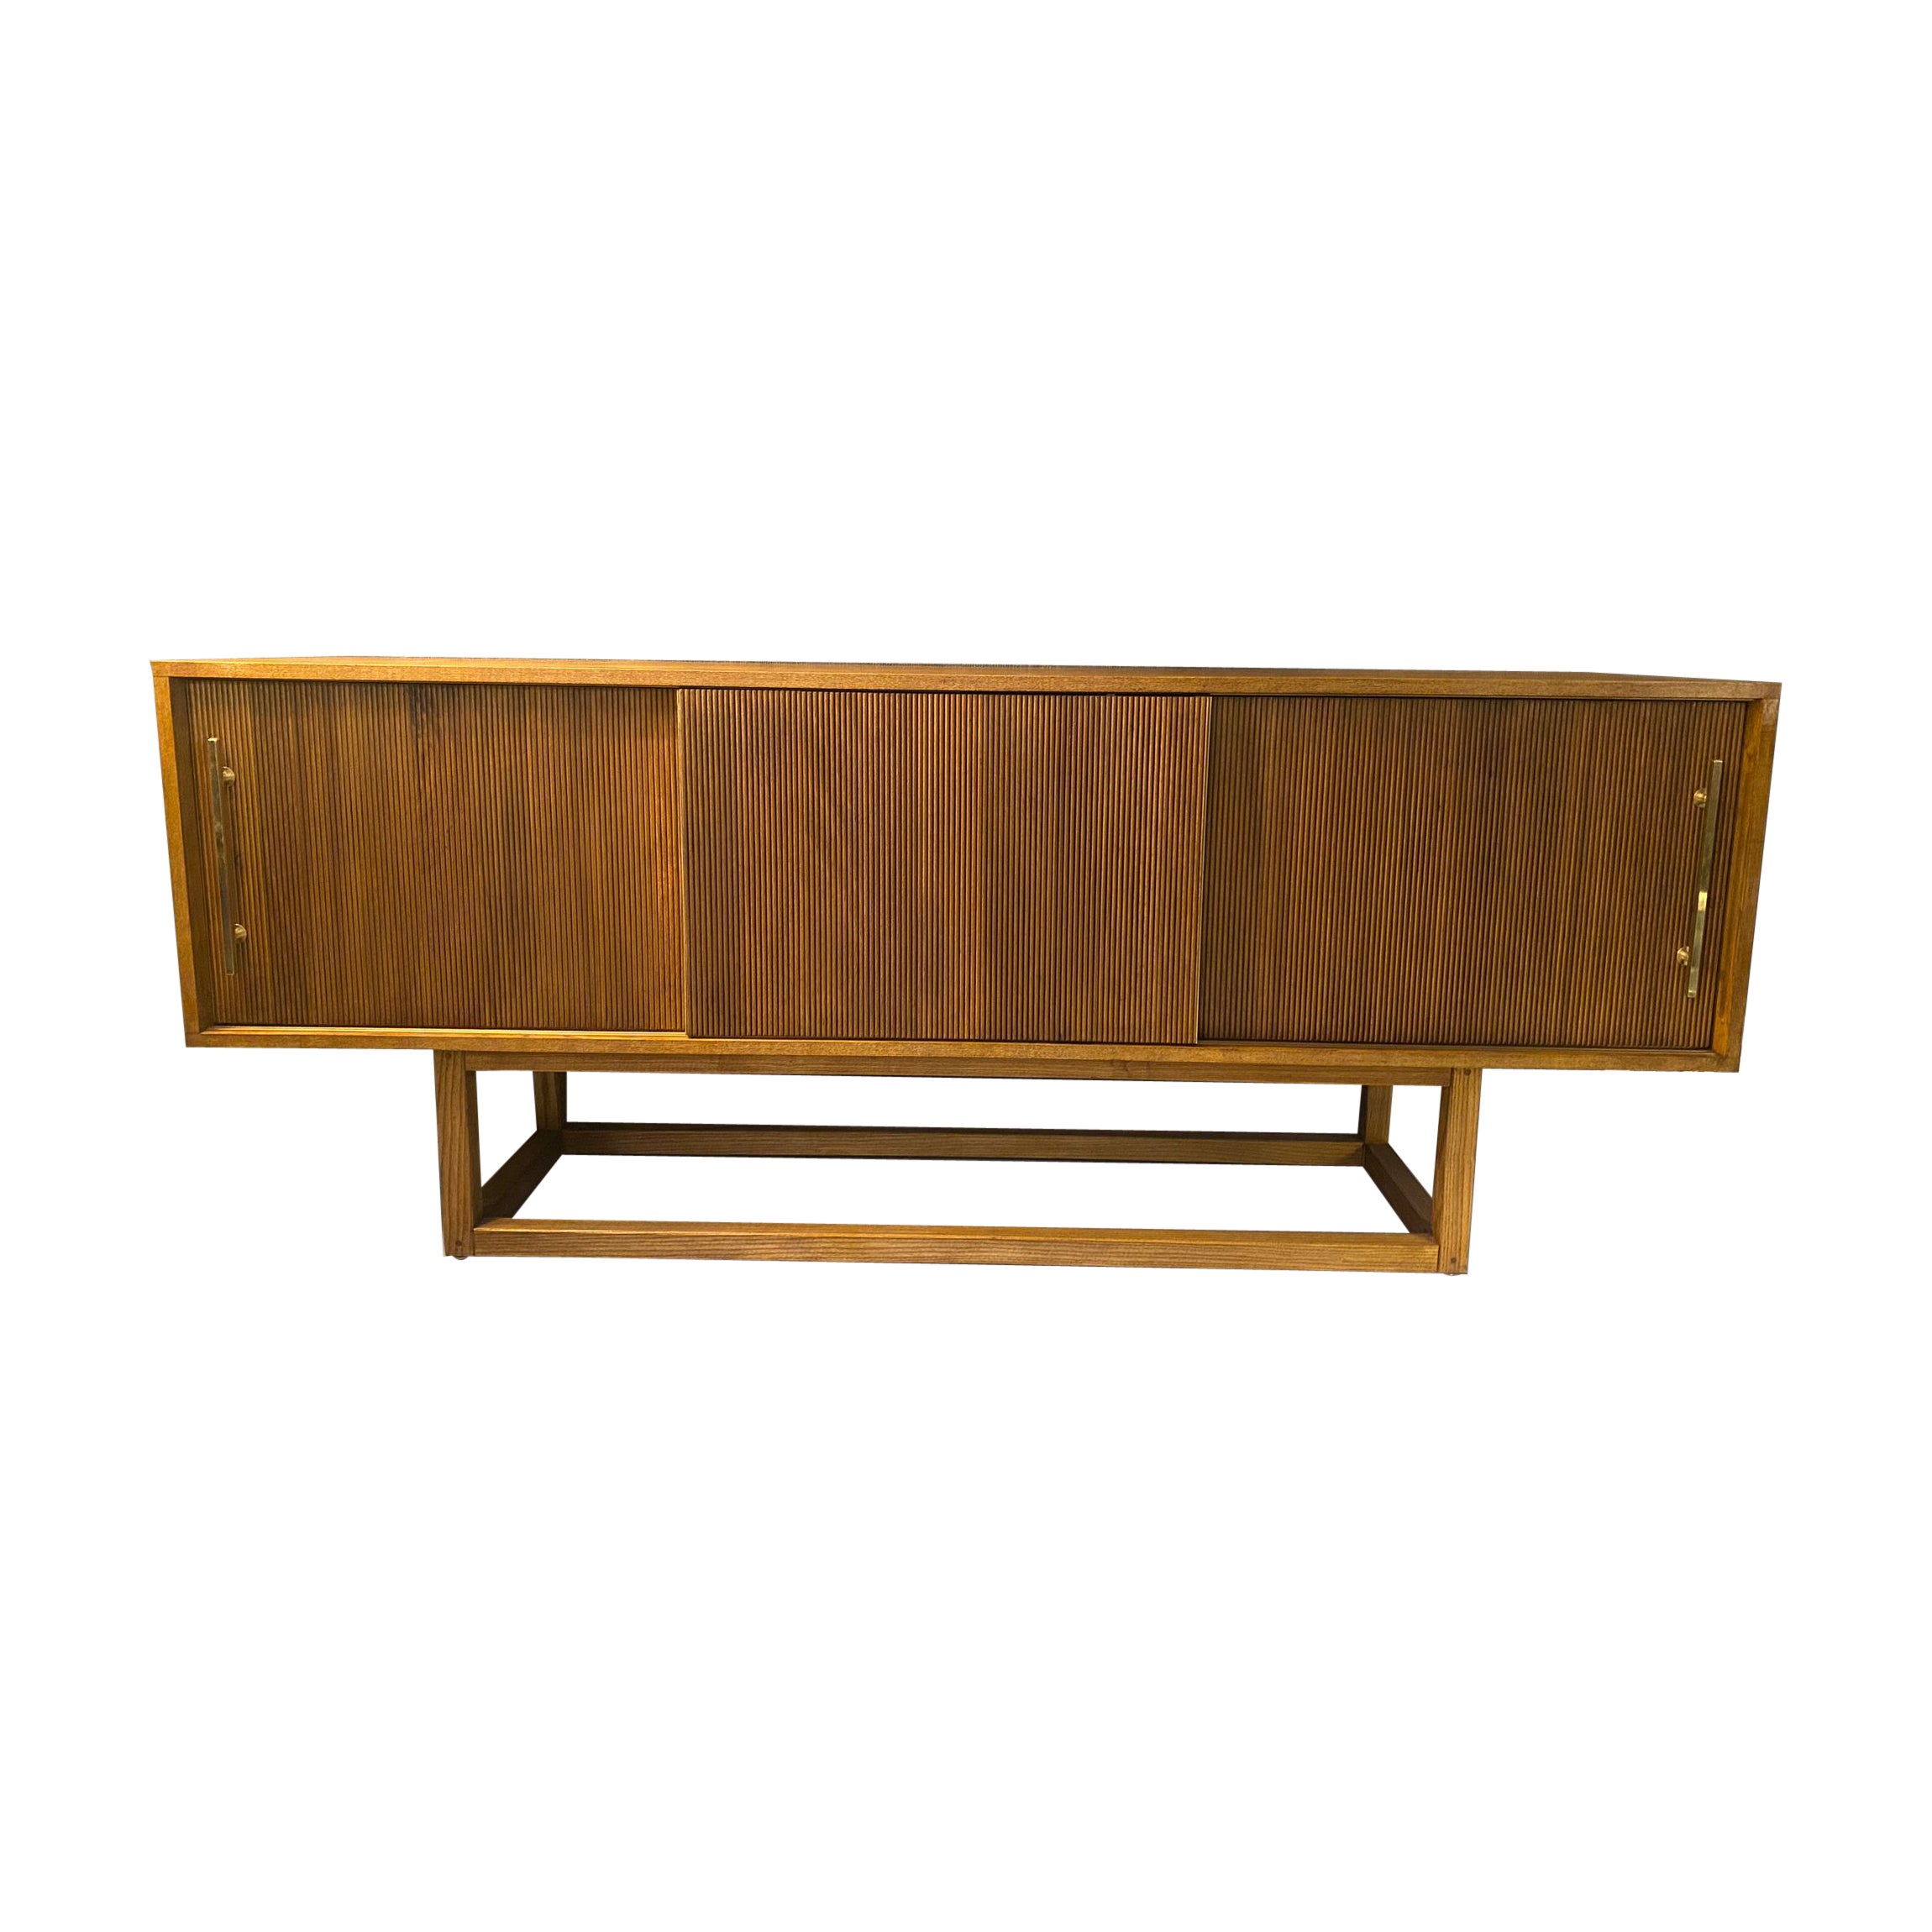 Italian Contemporary  Geometric Wood Sideboard with Brass Finishes For Sale